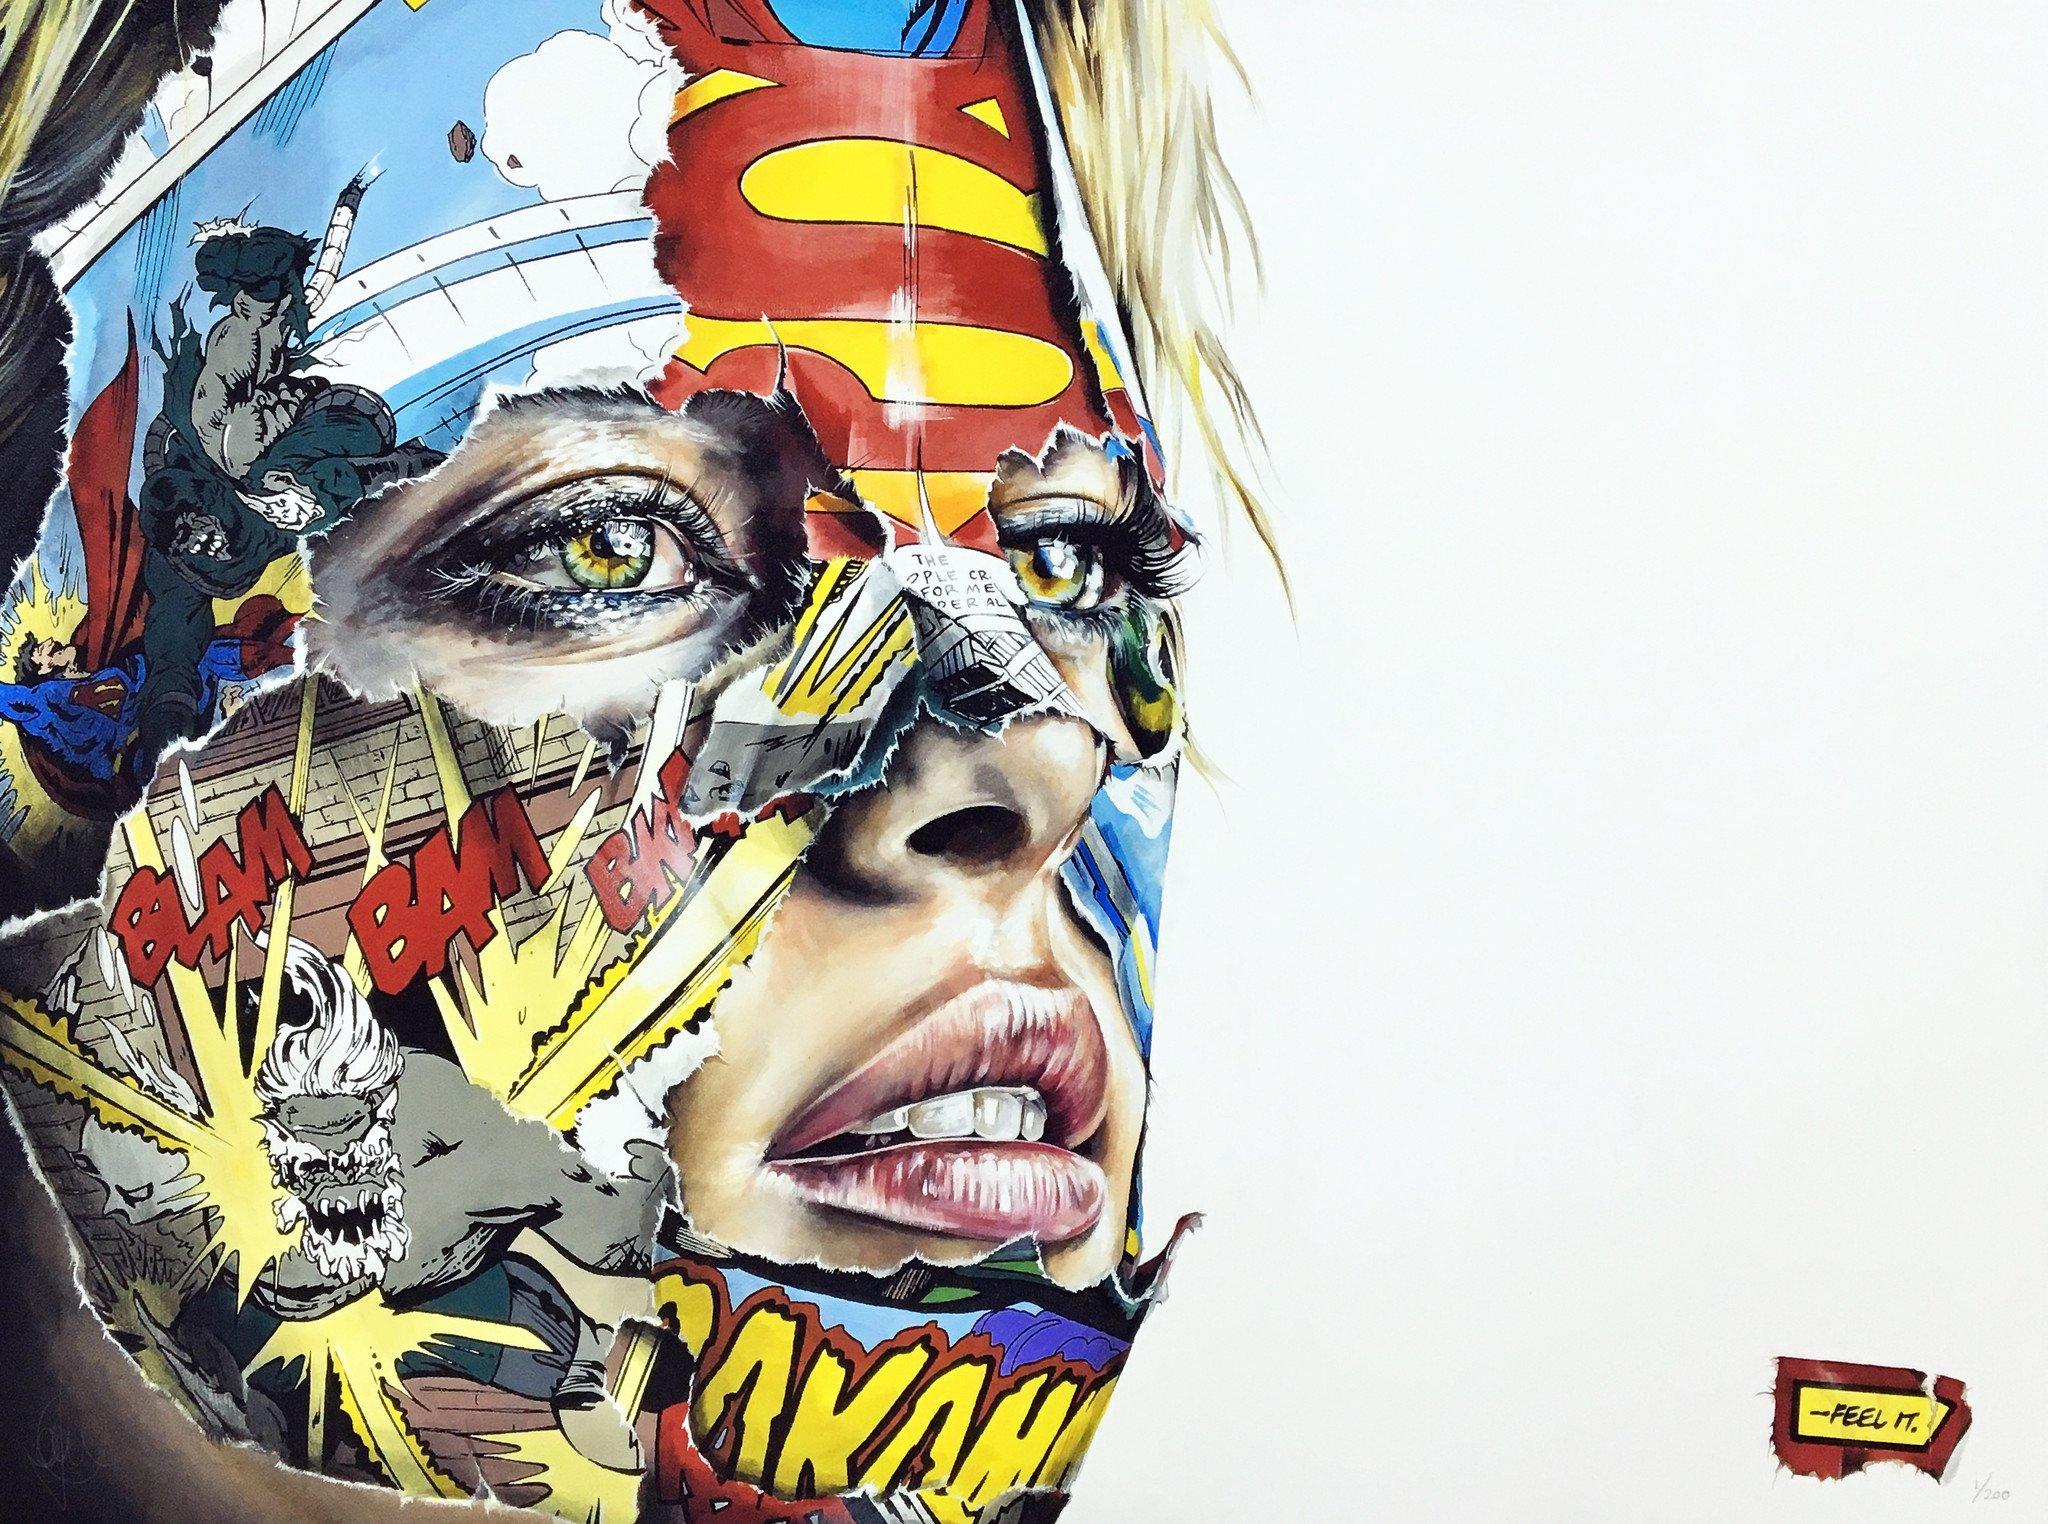 Limited edition print on Moab paper by contemporary Canadian artist Sandra Chevrier, from an edition of 200, signed and numbered by the artist. Professionally framed in a white shadowbox frame; unframed size 26 in x 34.5 in.
Sandra Chevrier